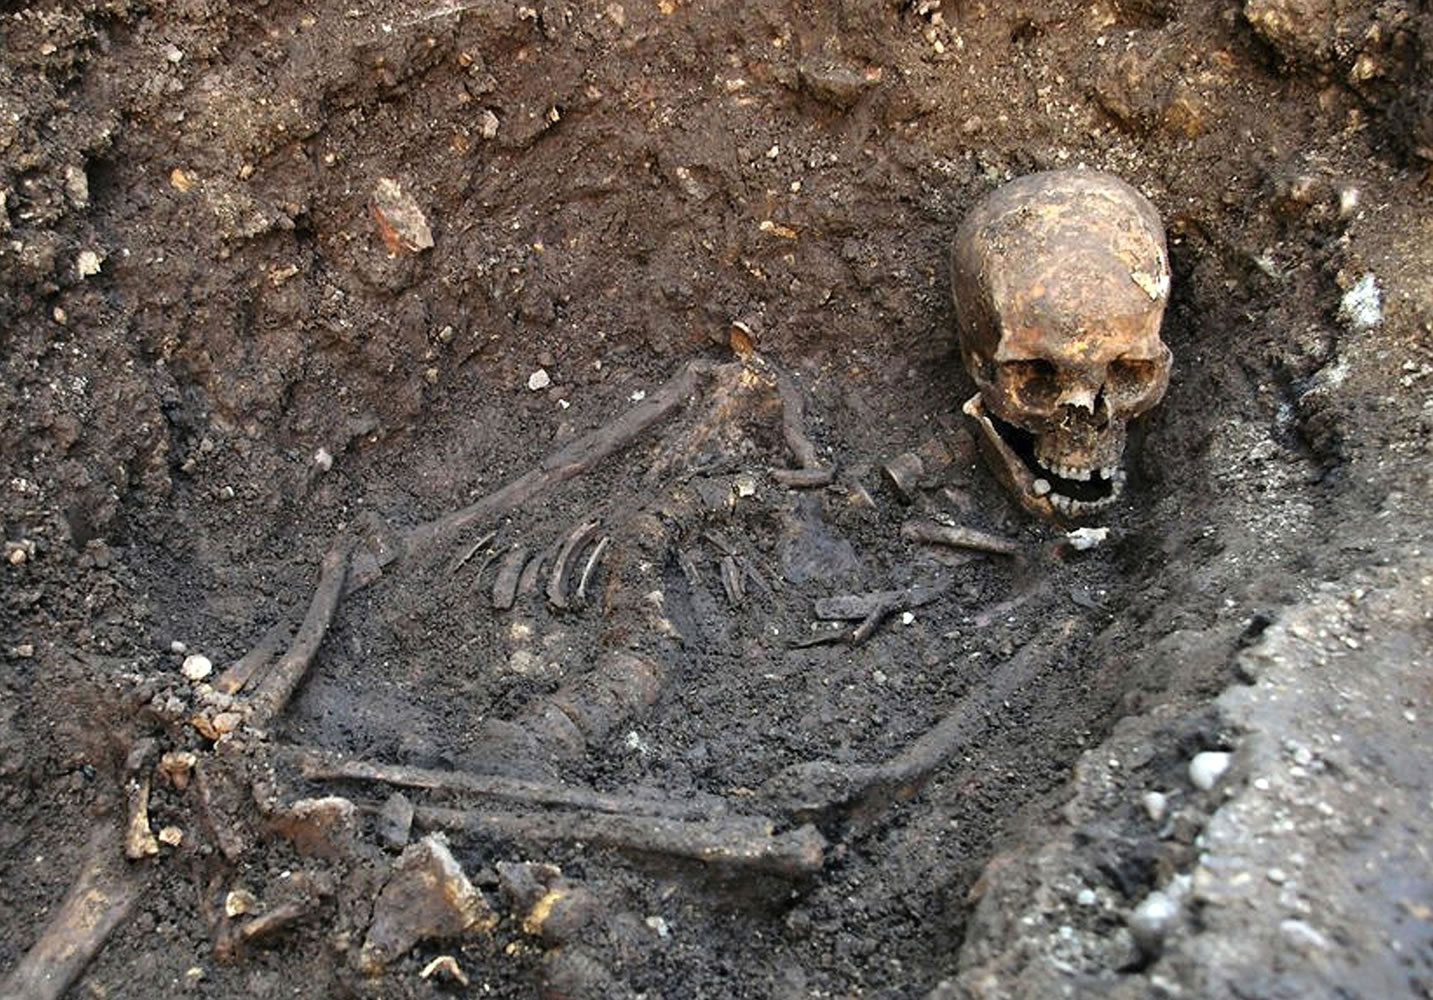 FILE- This is an undated file photo released by the University of Leicester, England, showing the remains human skeleton found underneath a car park in Leicester, England, September 2012, which has been declared &quot;beyond reasonable doubt&quot; to be the long lost remains of England's King Richard III, missing for 500 years.